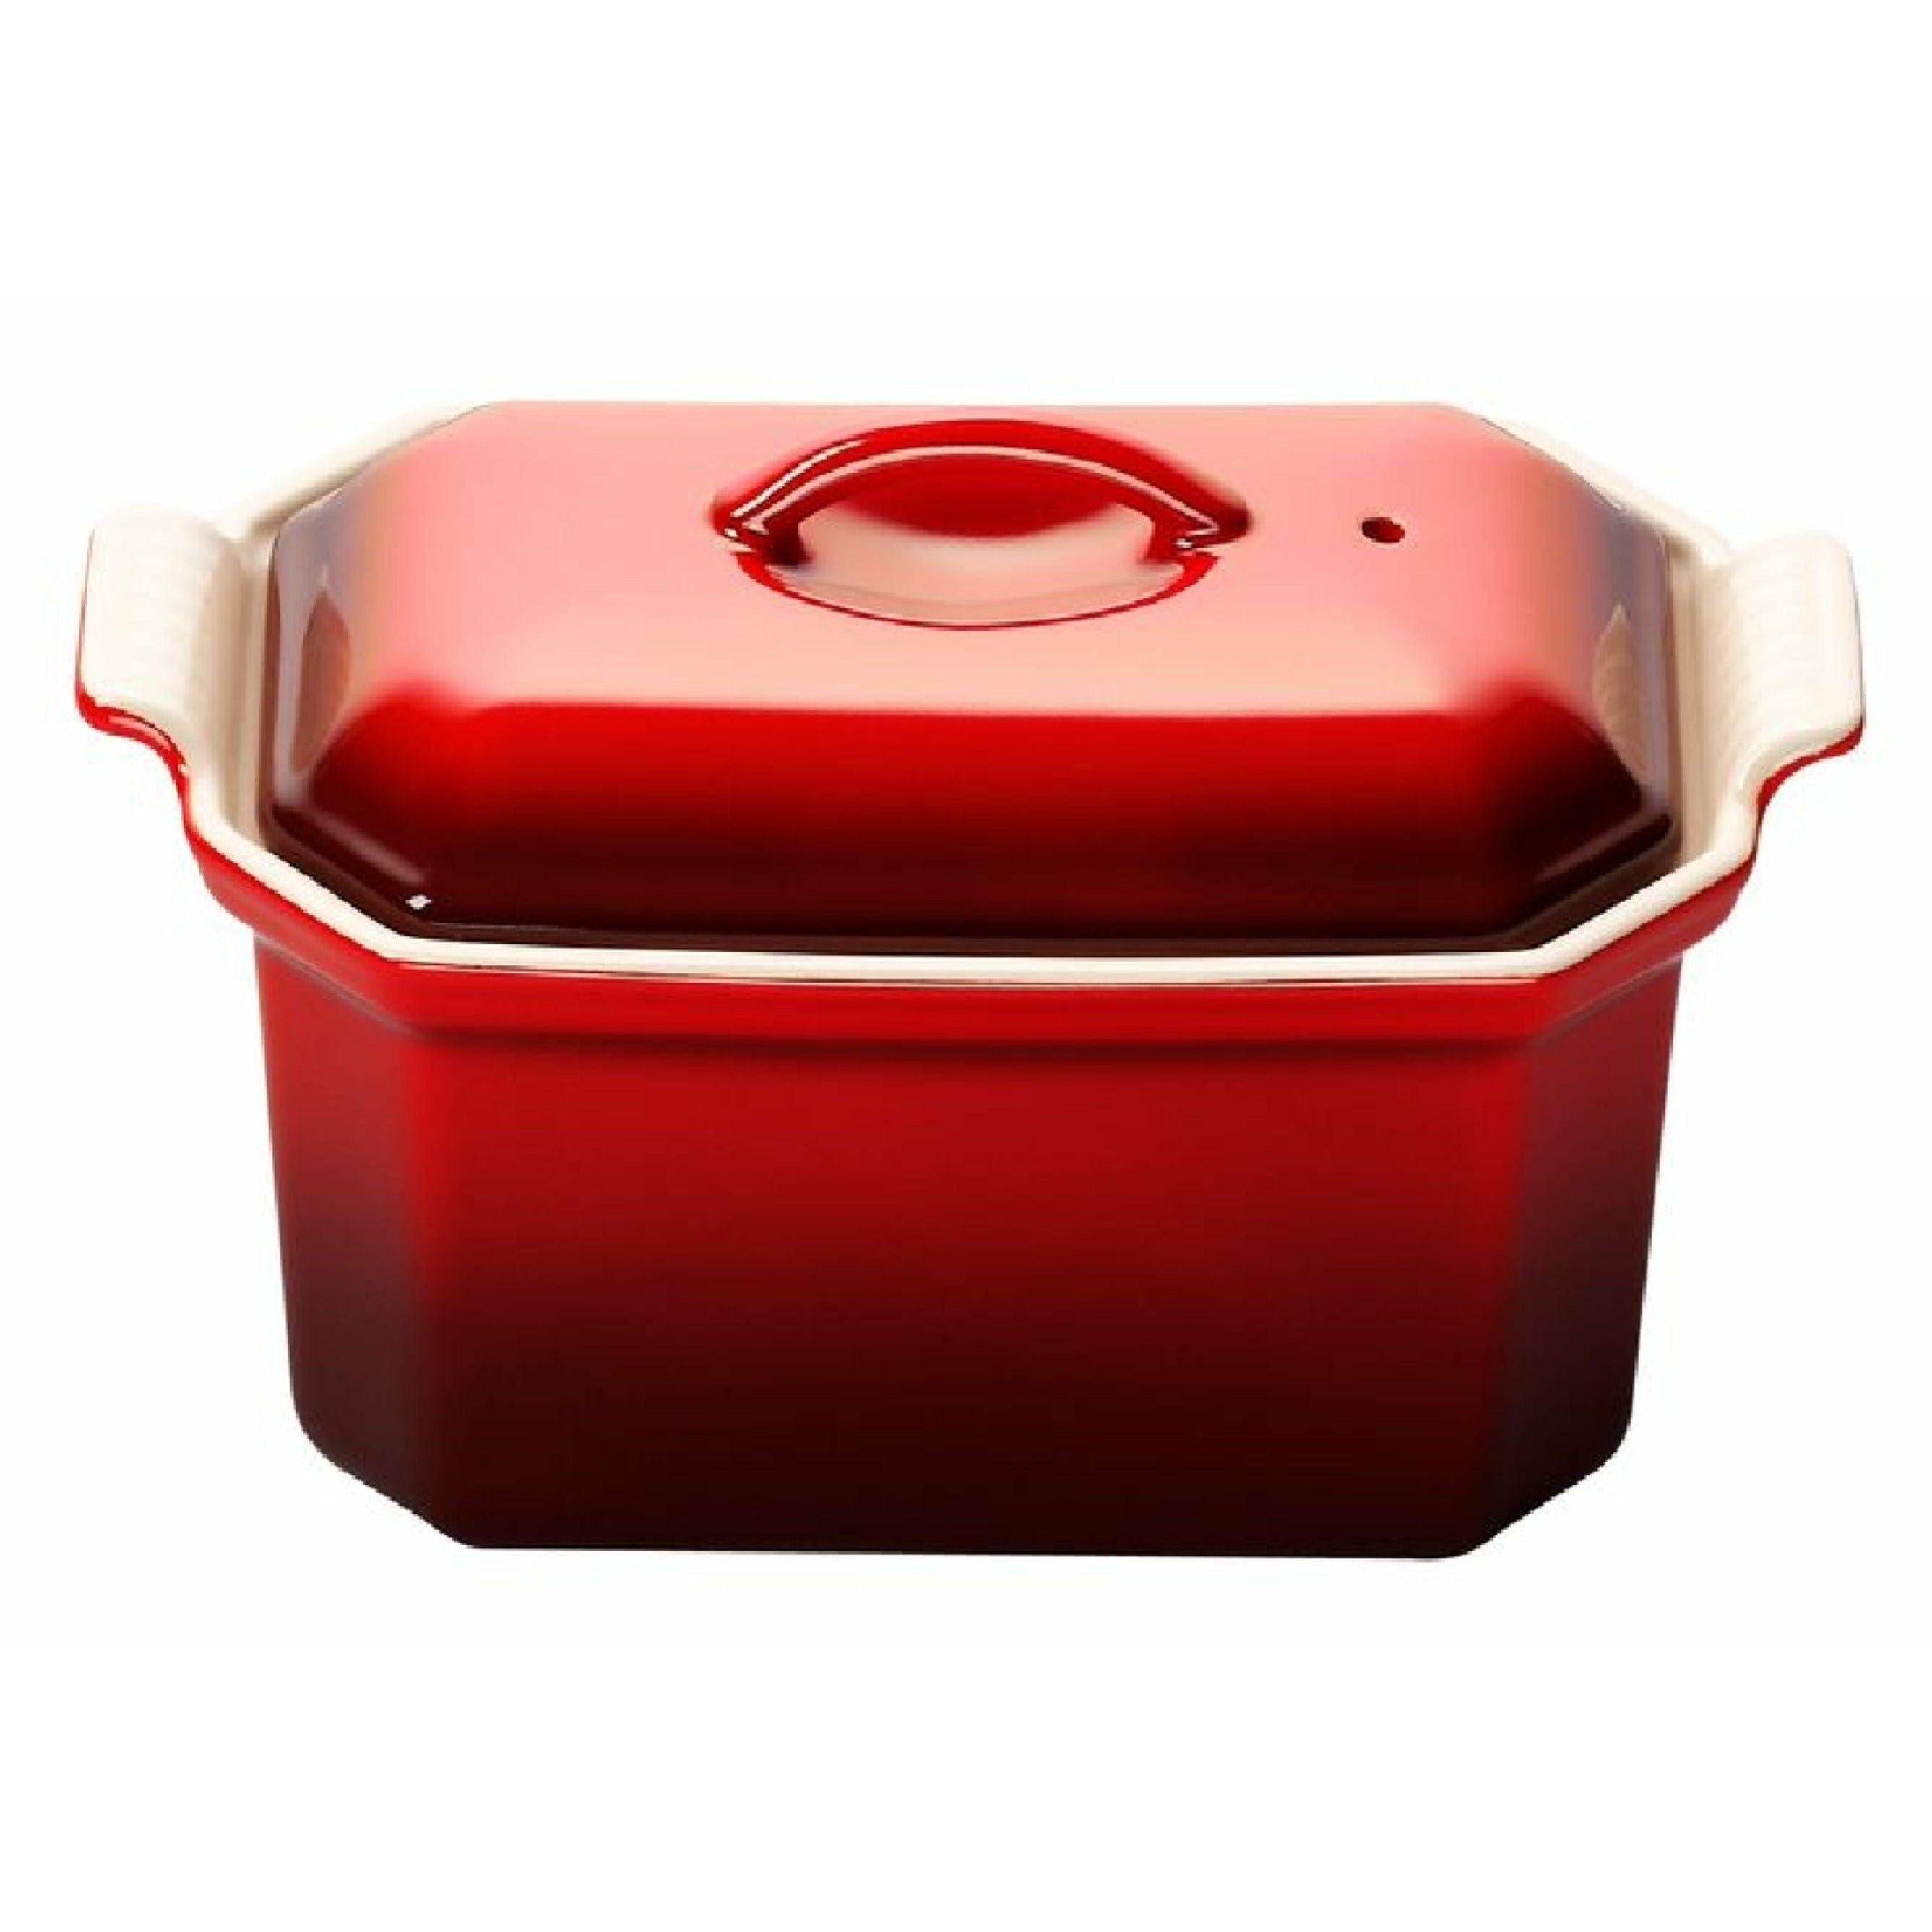 Le Creuset Pie Tin With Press 0.6 L, Cherry Red